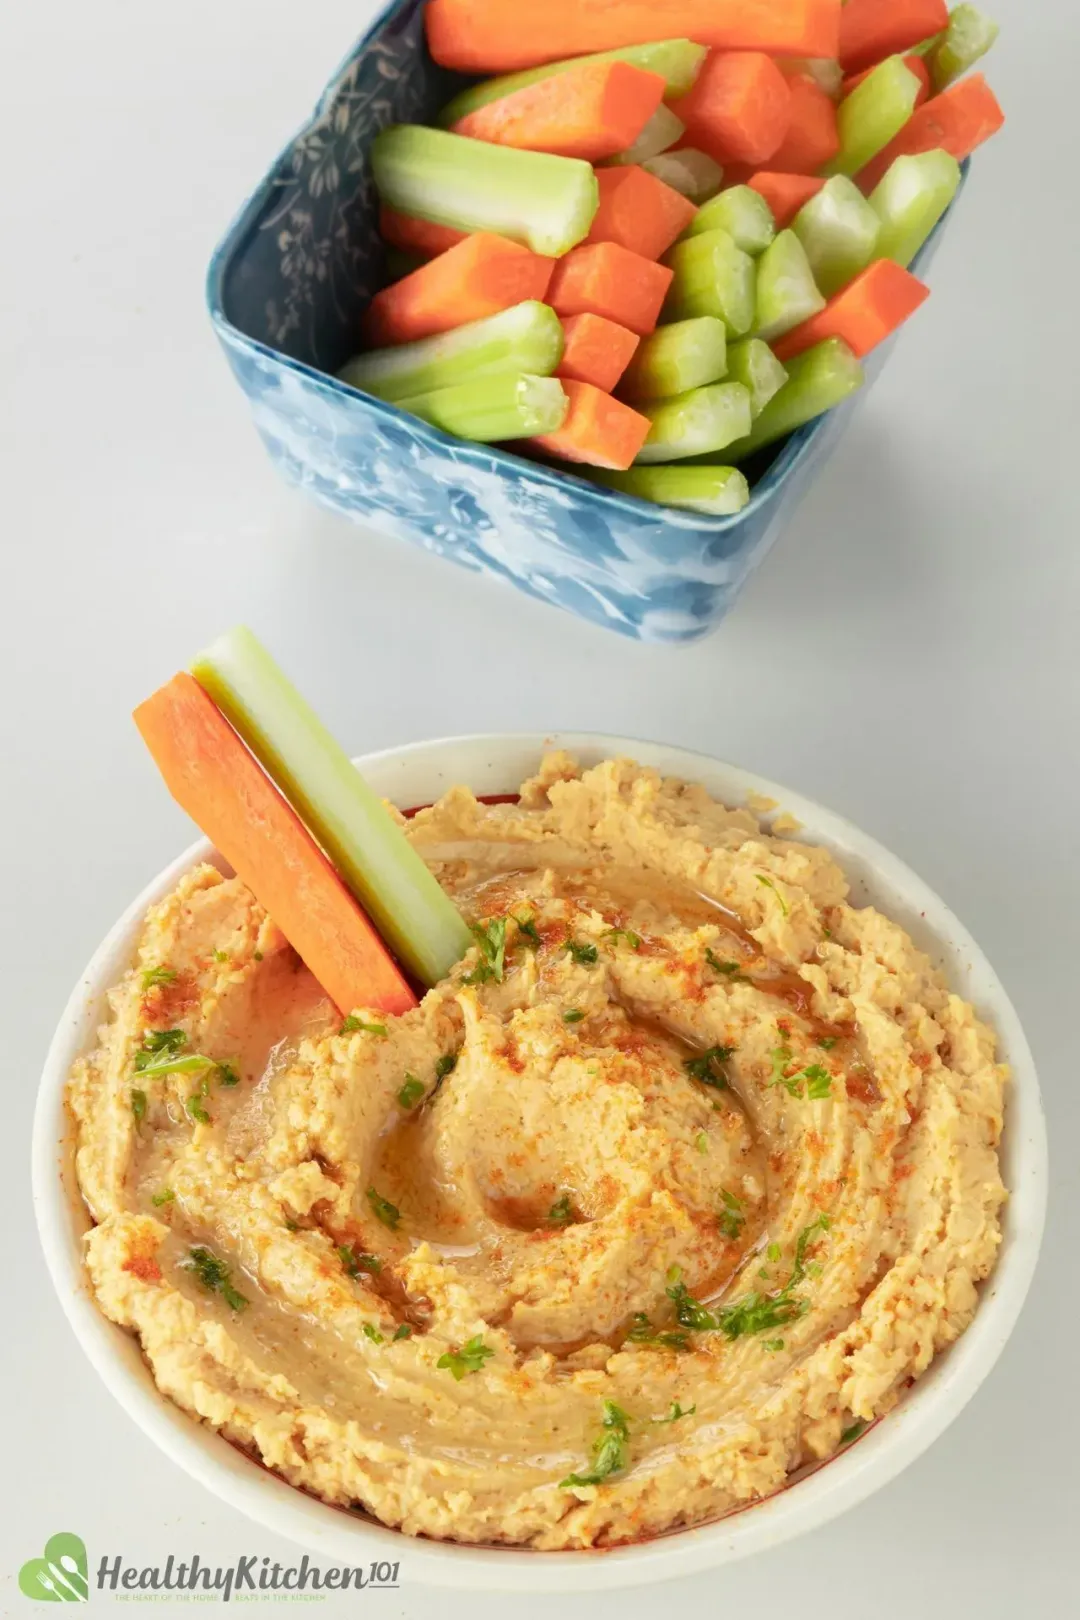 What Do You Eat Hummus With